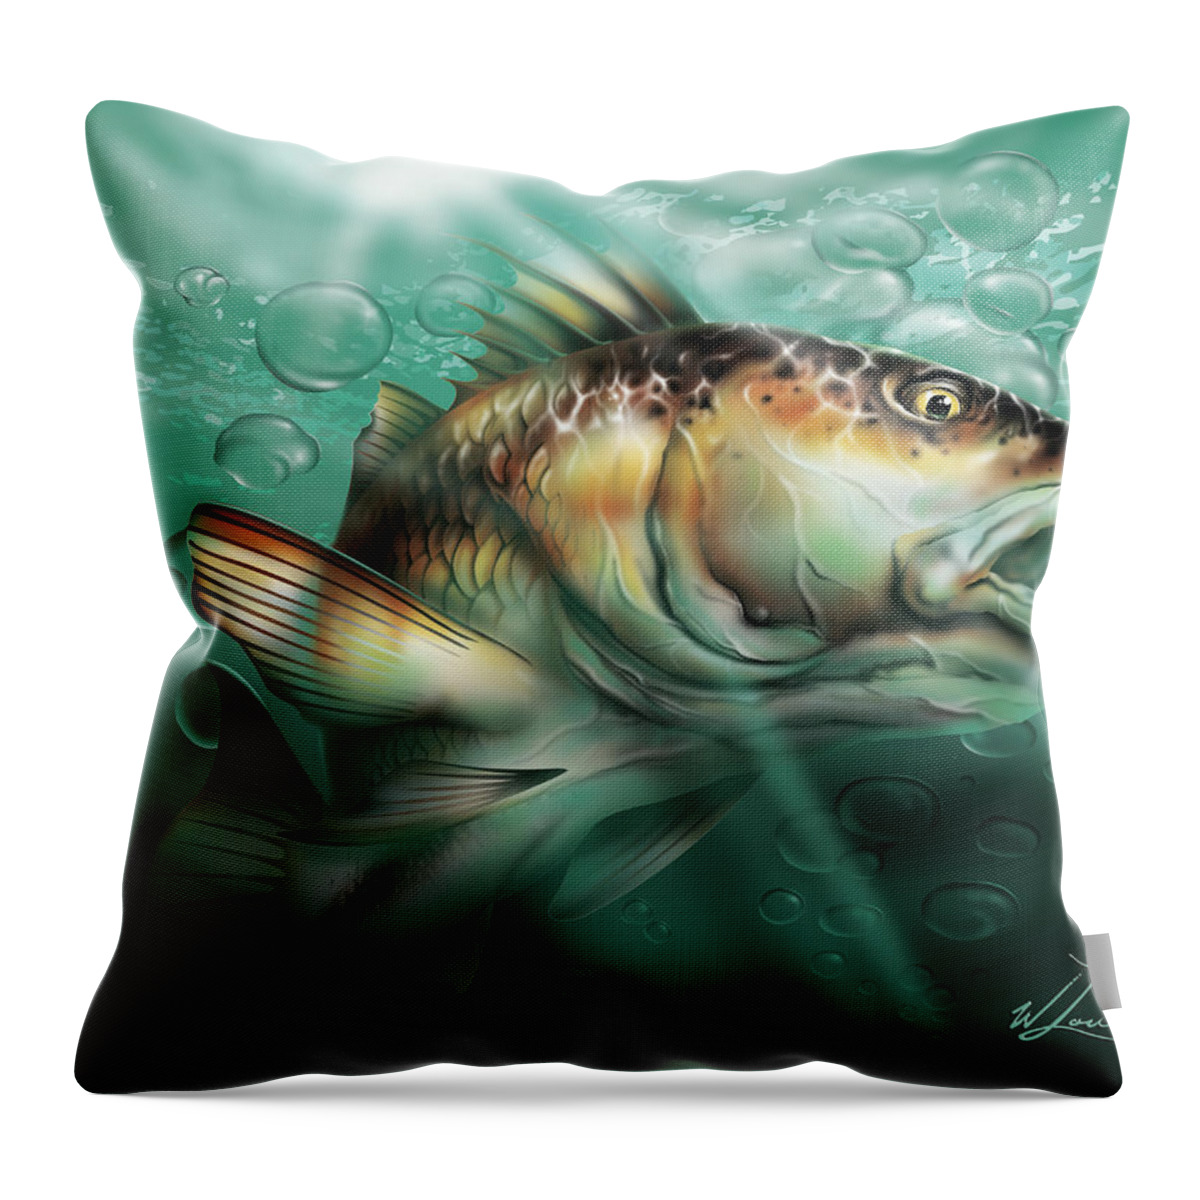 Red Drum Throw Pillow featuring the digital art Red Drum by William Love